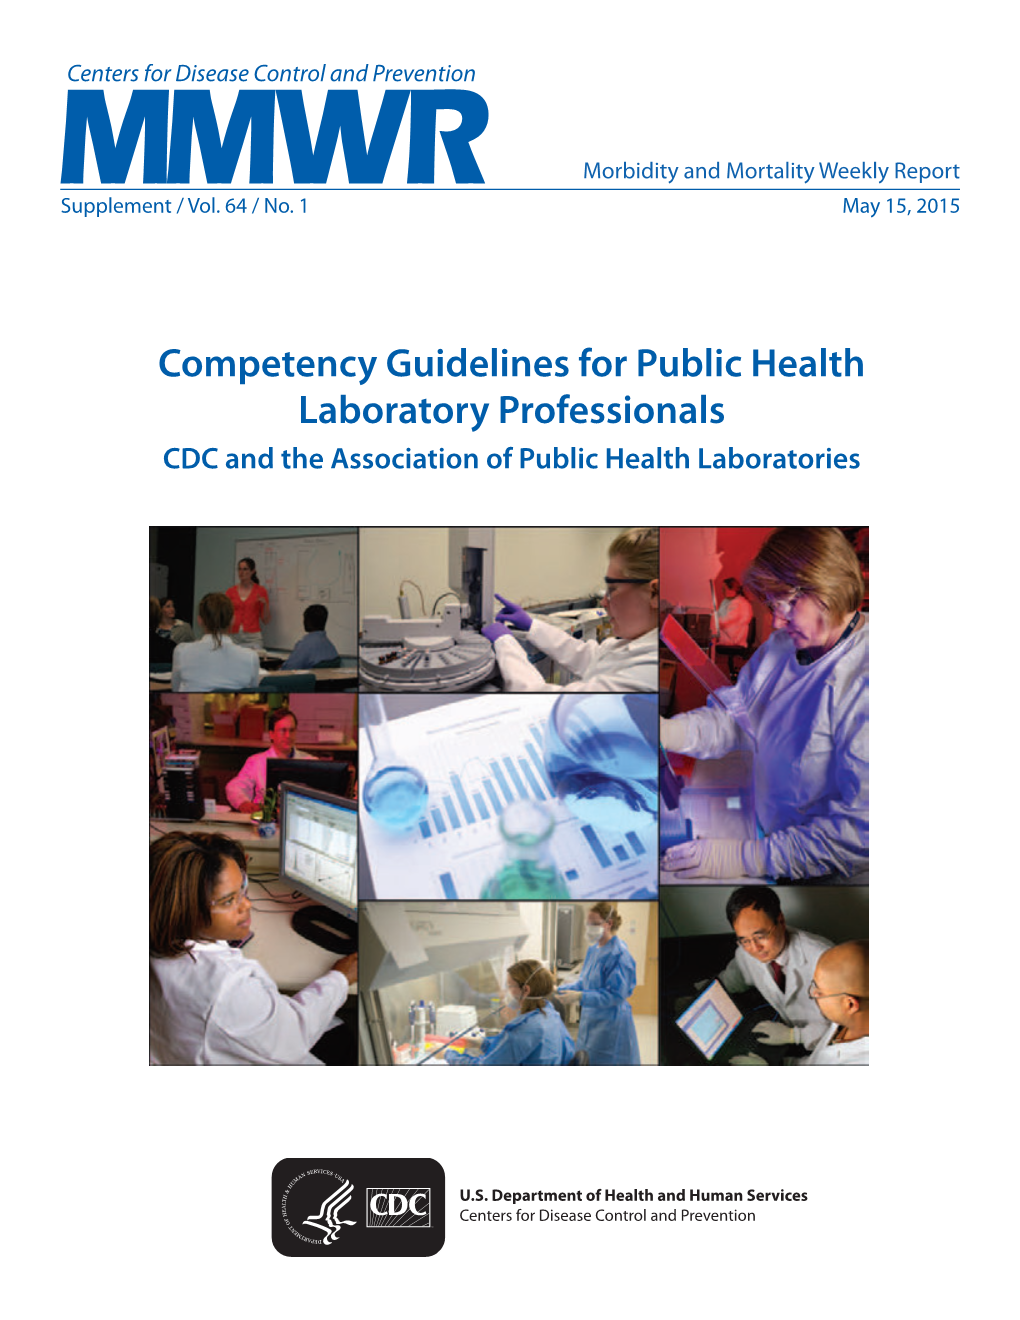 Competency Guidelines for Public Health Laboratory Professionals CDC and the Association of Public Health Laboratories